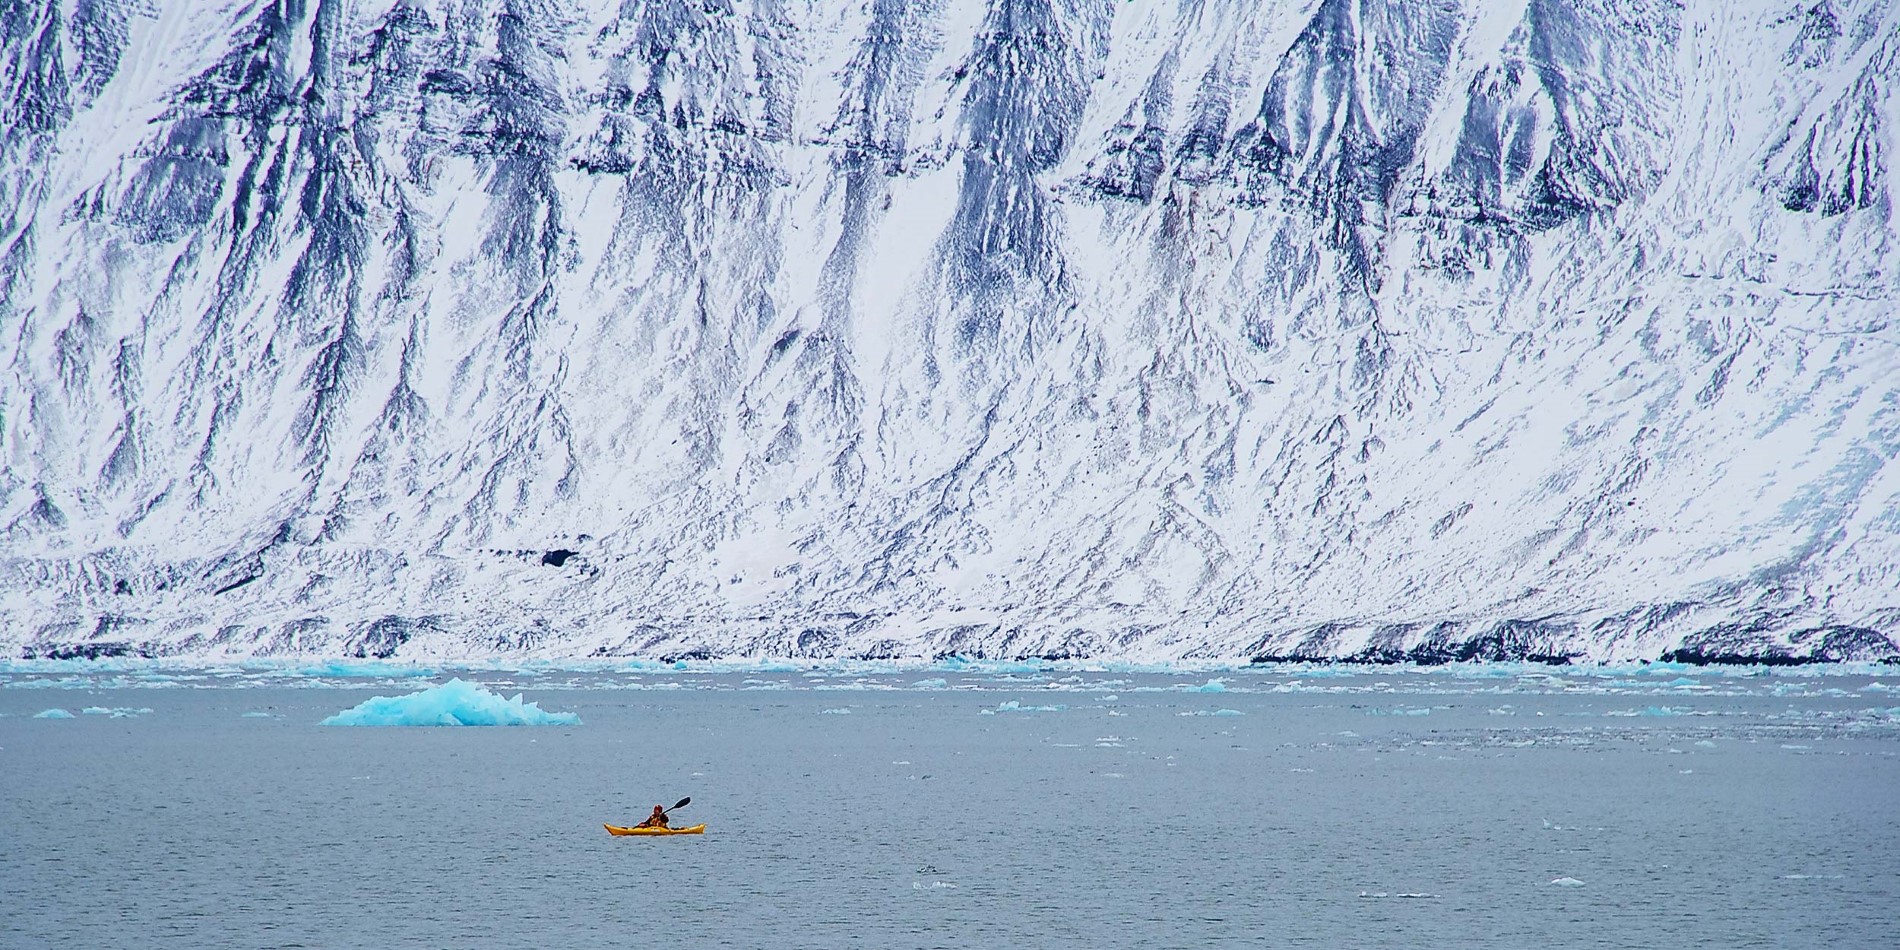 Explore the Arctic waters from a kayak